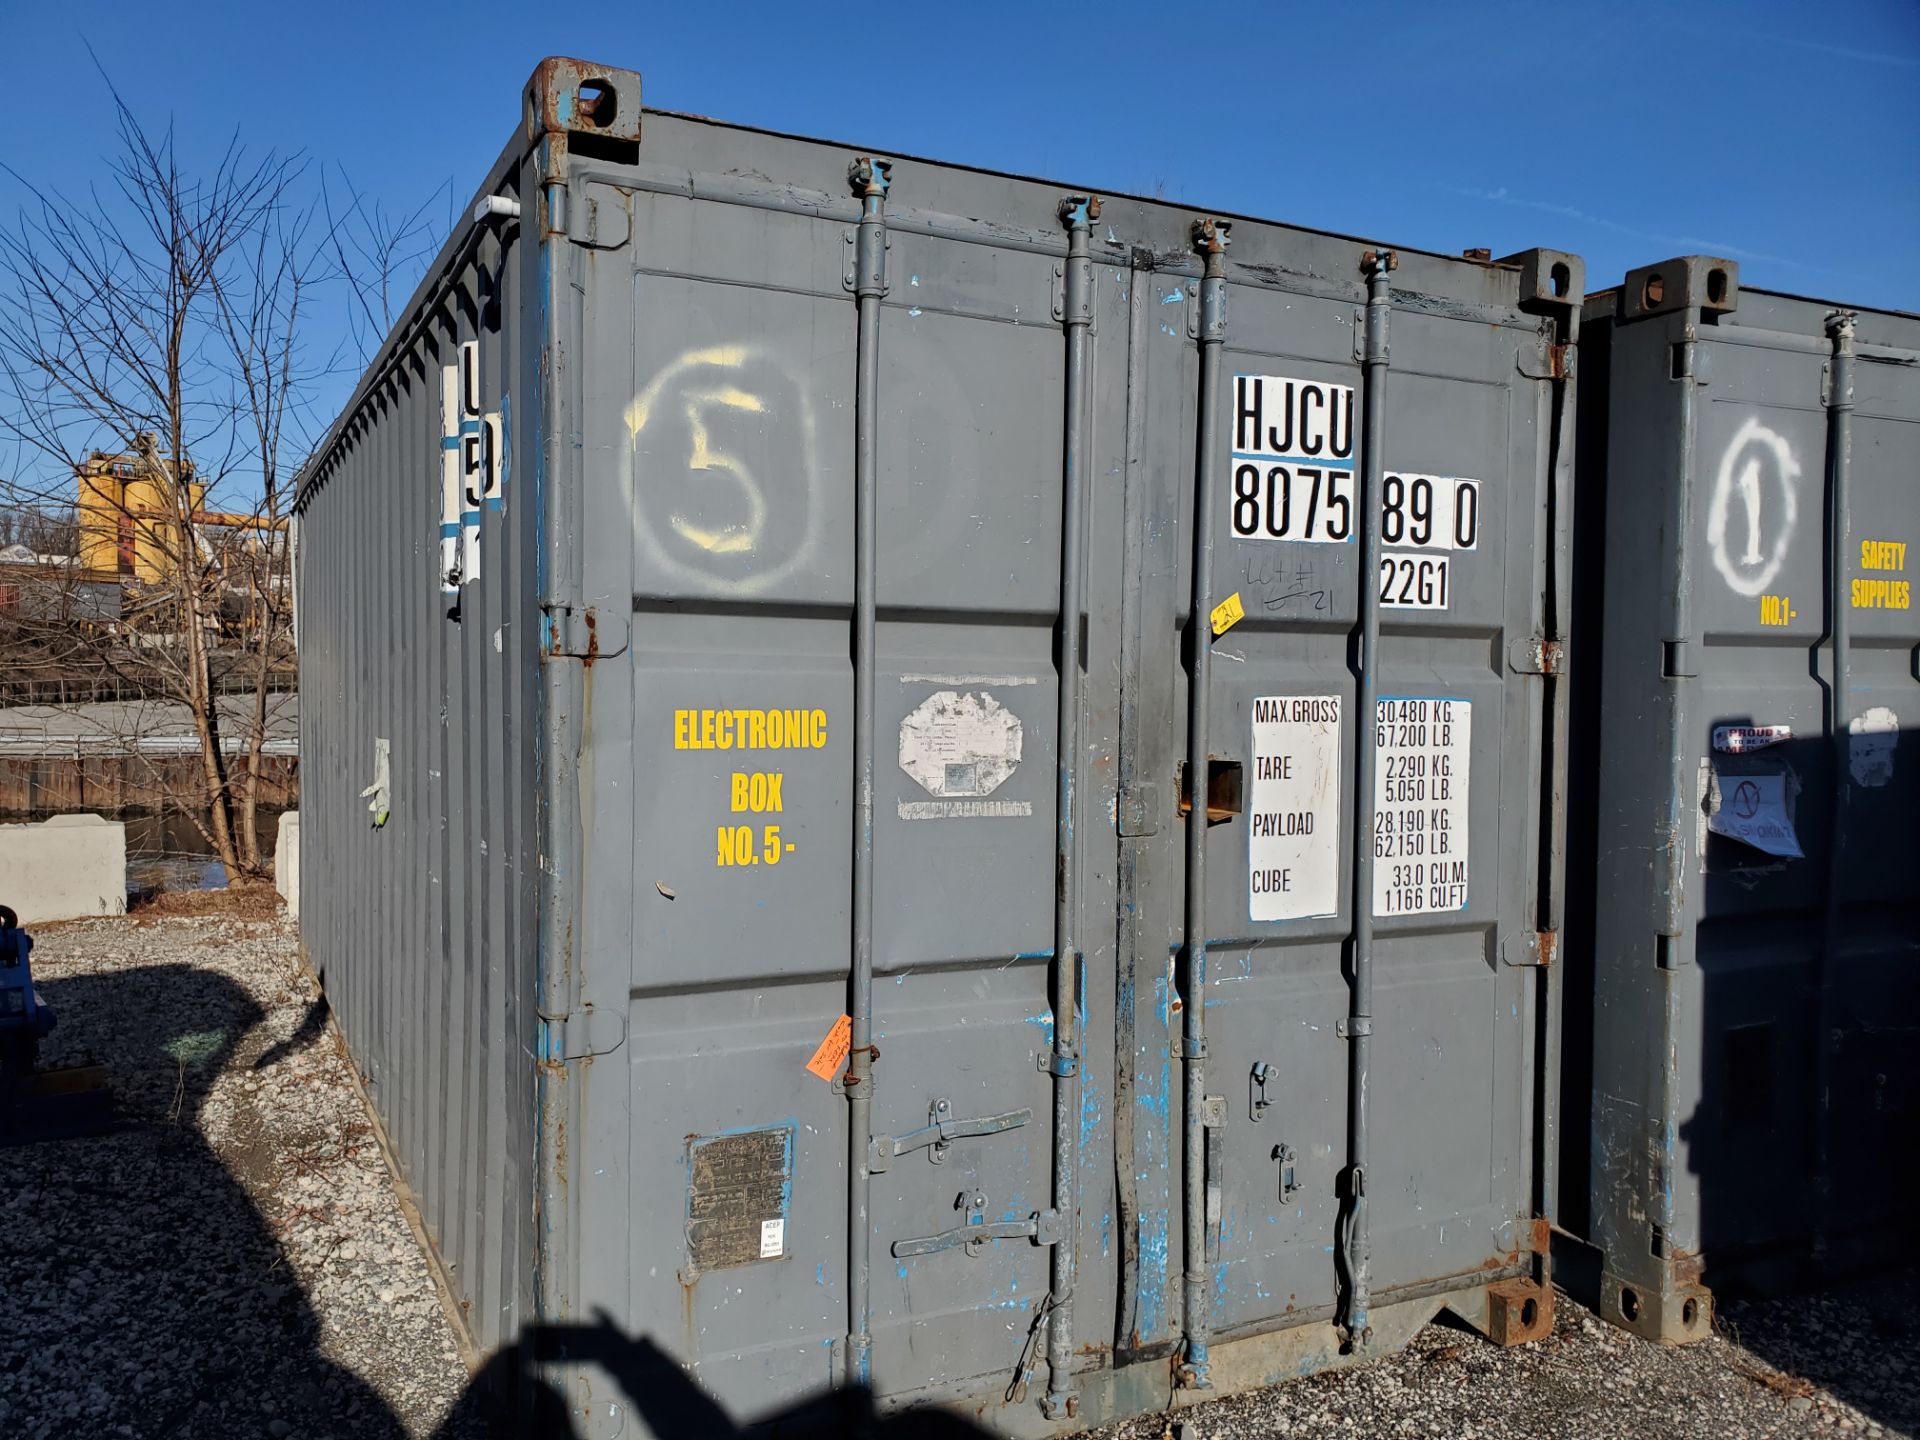 20' SHIPPING CONTAINER [LOCATED @ 6 CANAL ROAD, PELHAM, NY (BRONX)]